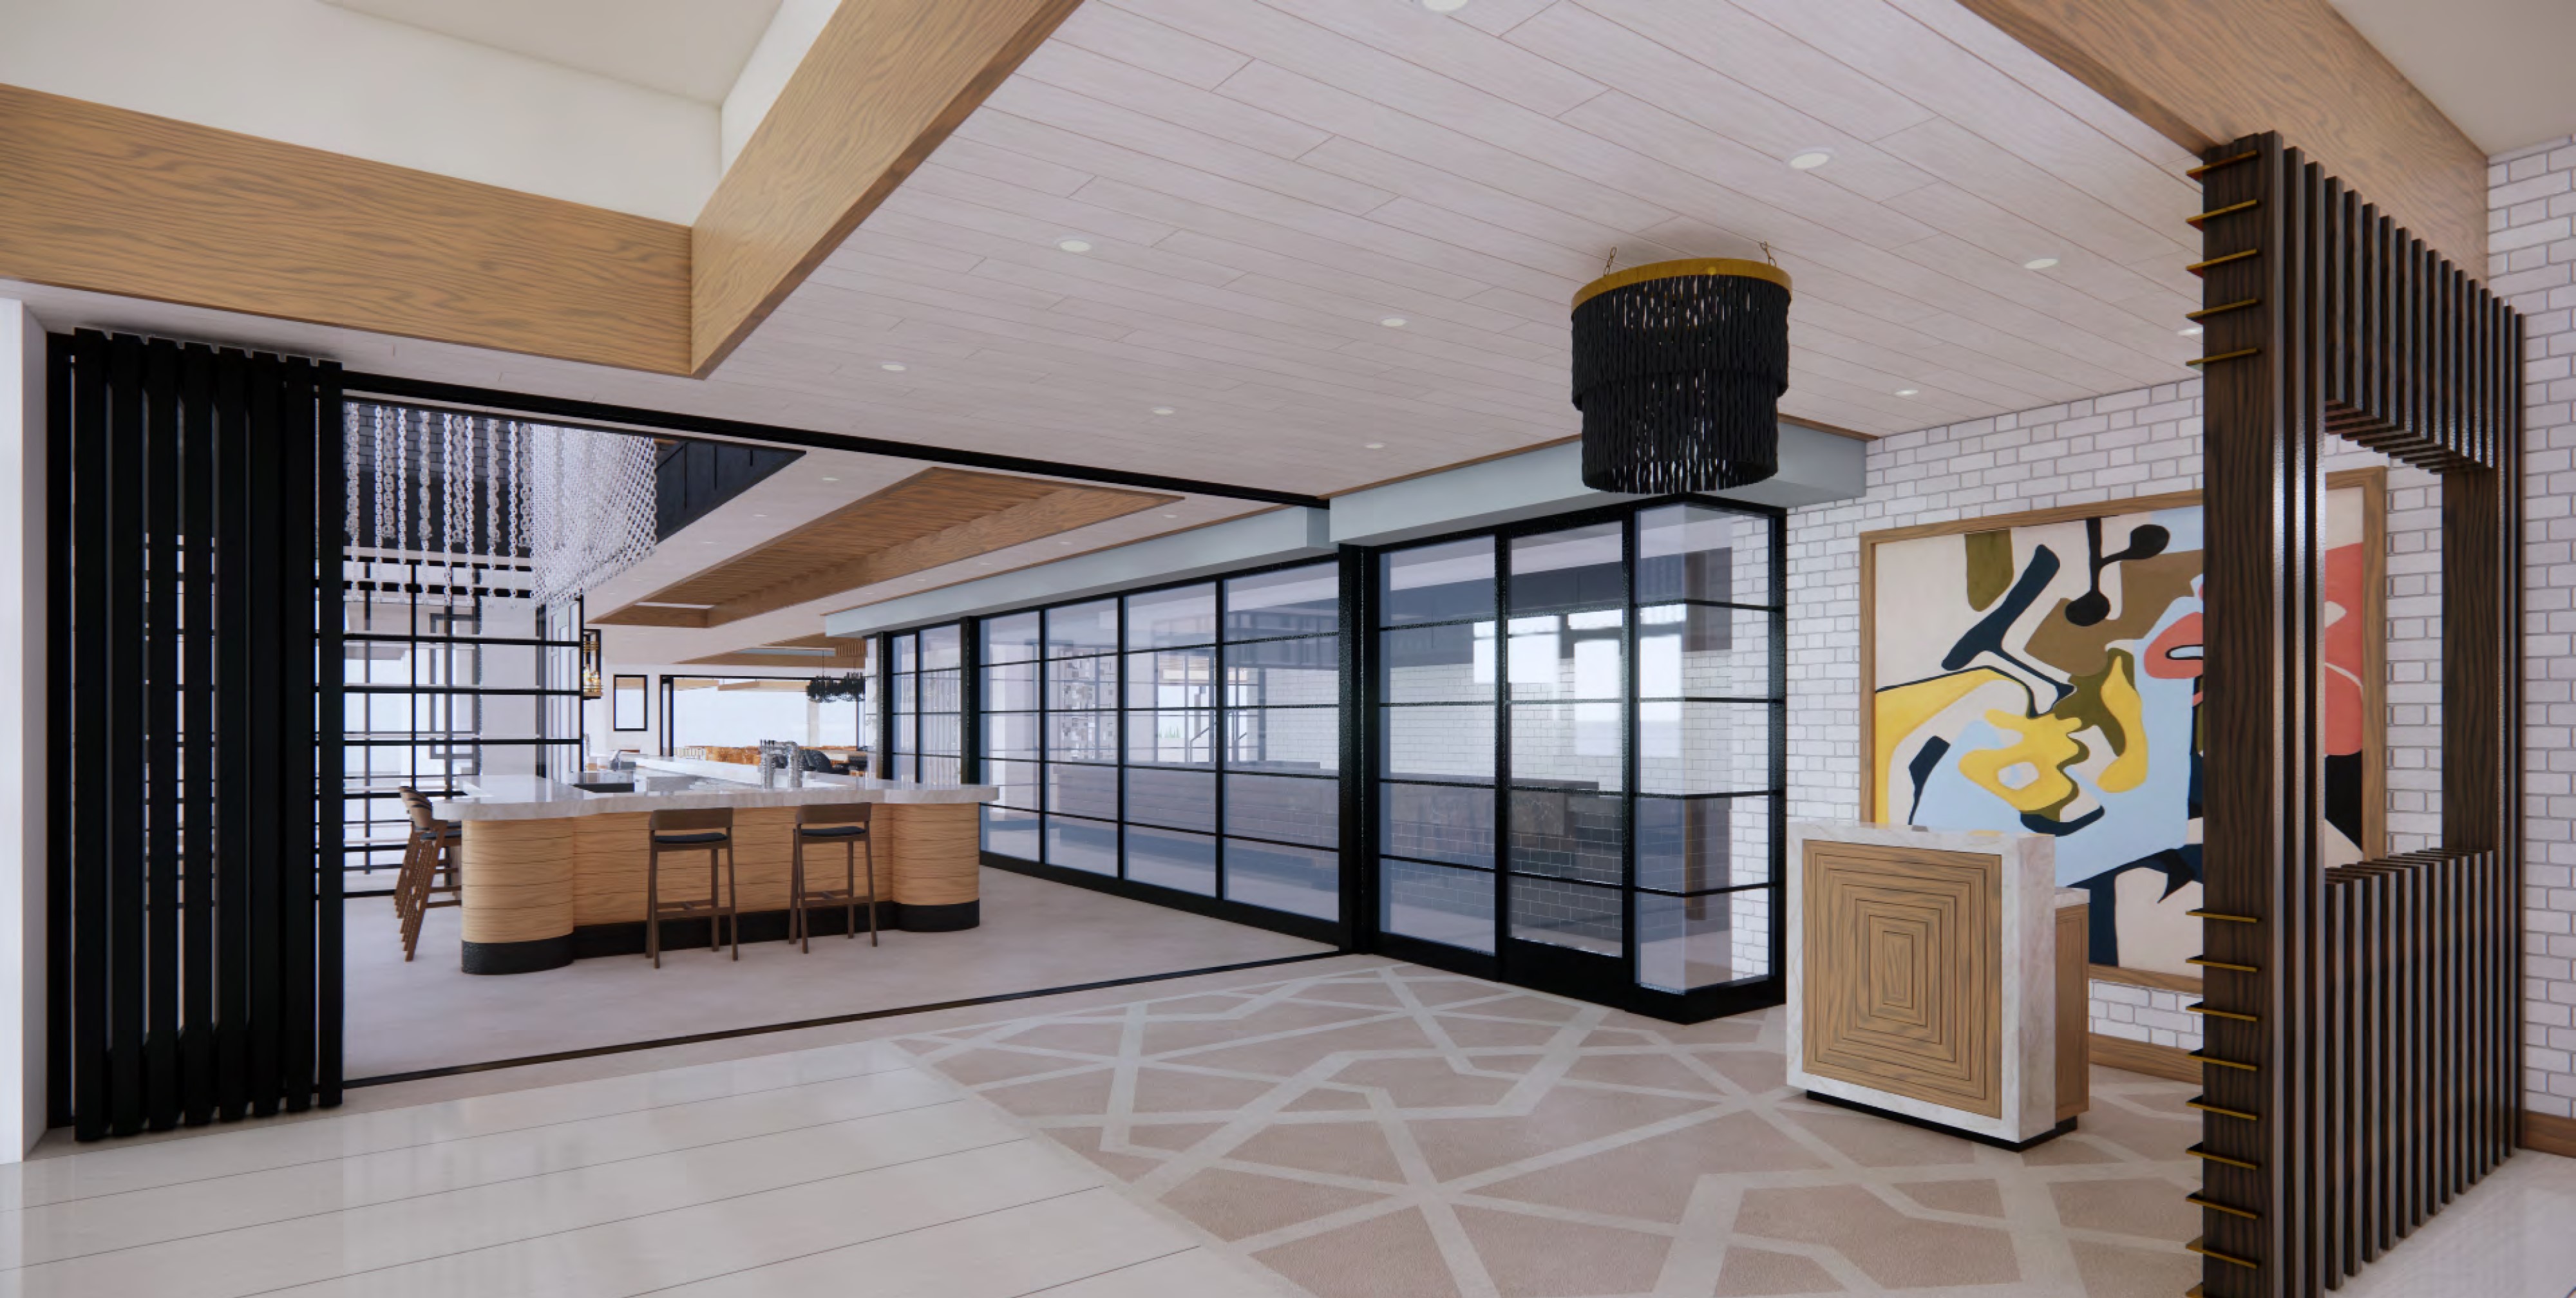 Modern office lobby interior featuring a wooden reception desk, geometric floor design, large abstract wall art, and glass partition walls with an open-air patio.